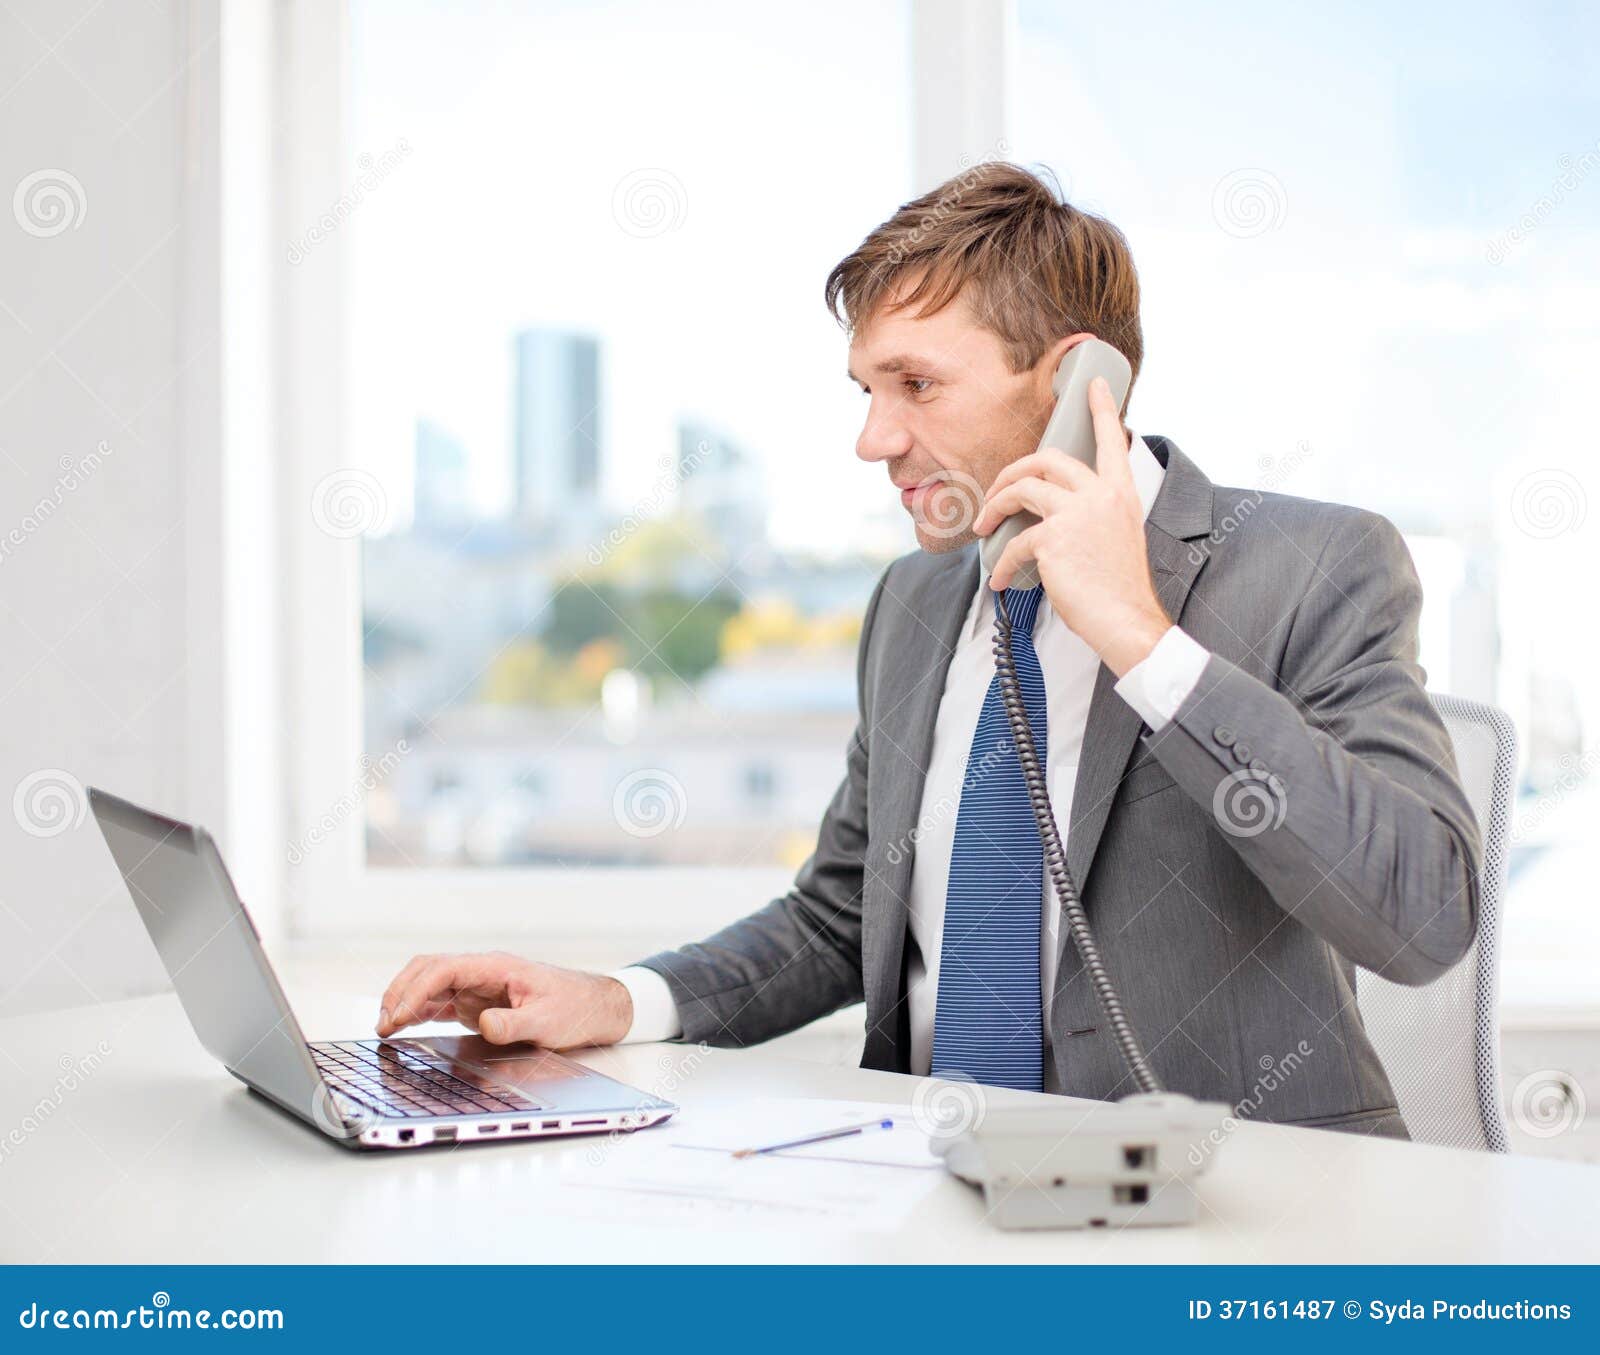 Businessman with Laptop Computer and Phone Stock Image - Image of ...